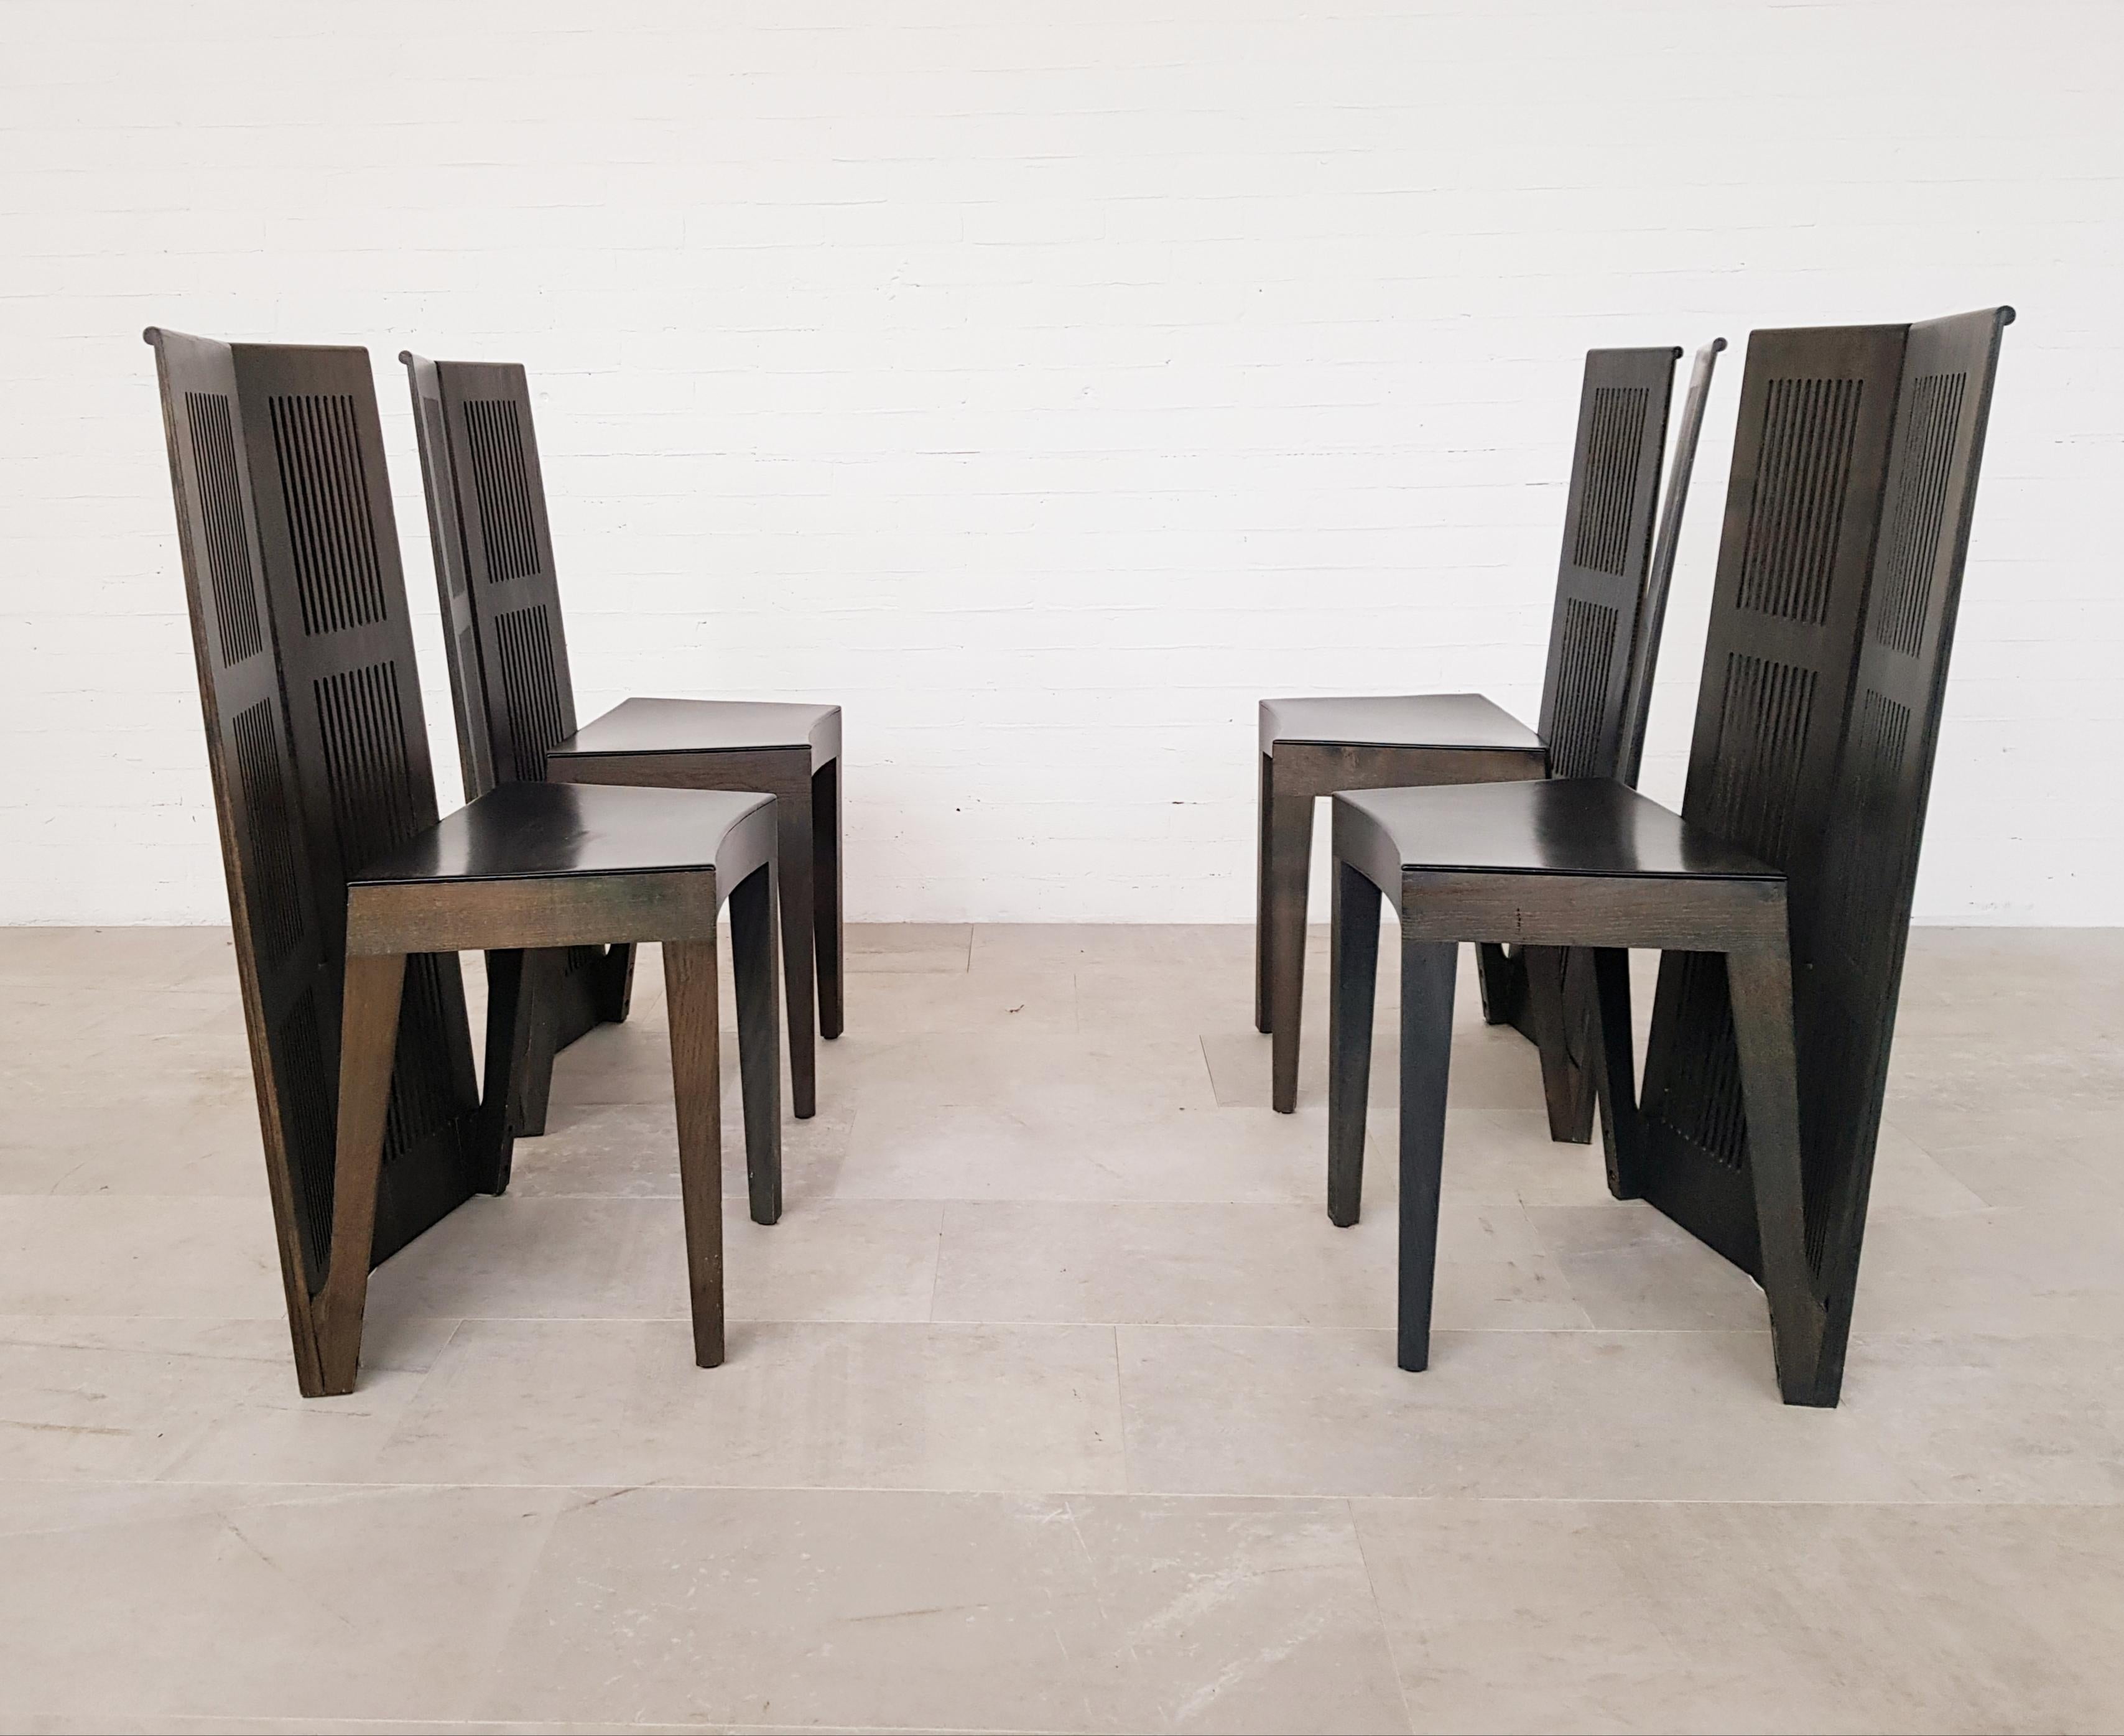 Lubbeka Chairs by Andrea Branzi for Cassina 1